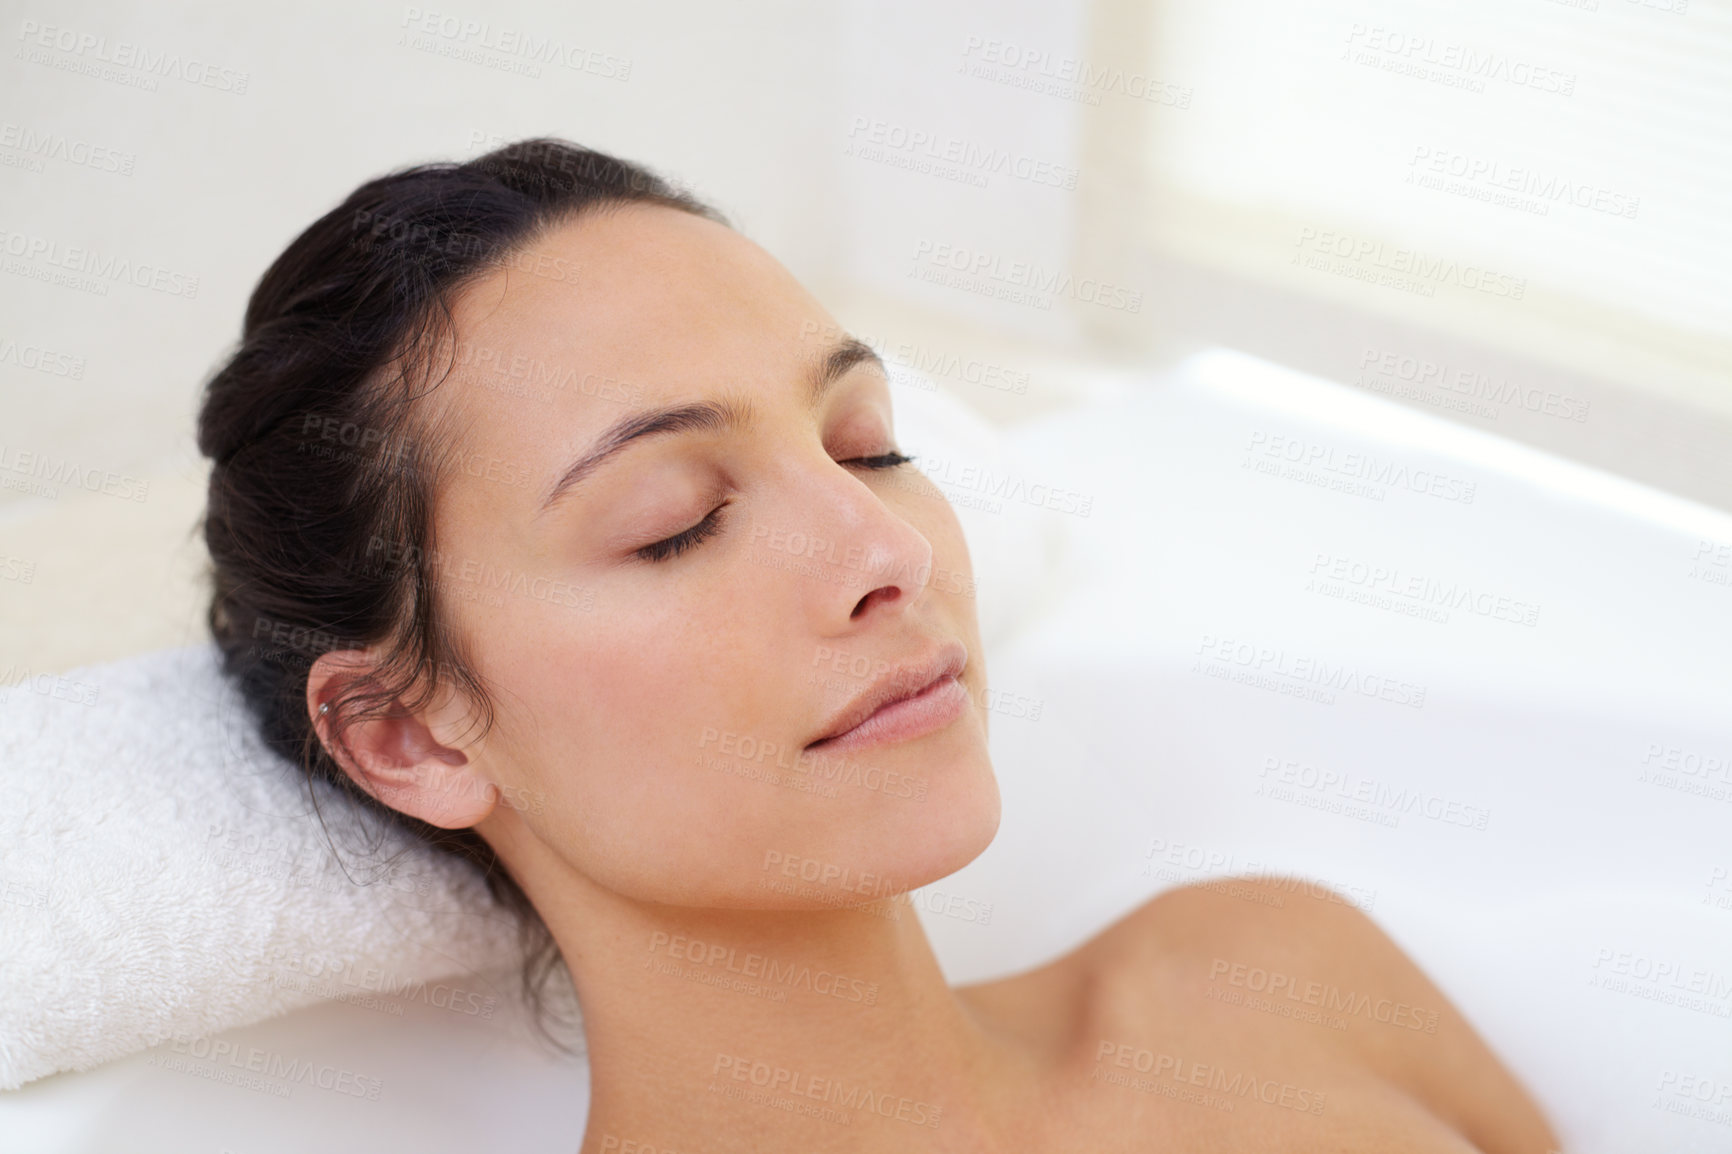 Buy stock photo Relax, bath and face of woman in bathtub for wellness, stress relief or skin detox with comfort at home. Self care, peace or person bathing in tub for cleaning, pamper or diy spa bathroom treatment